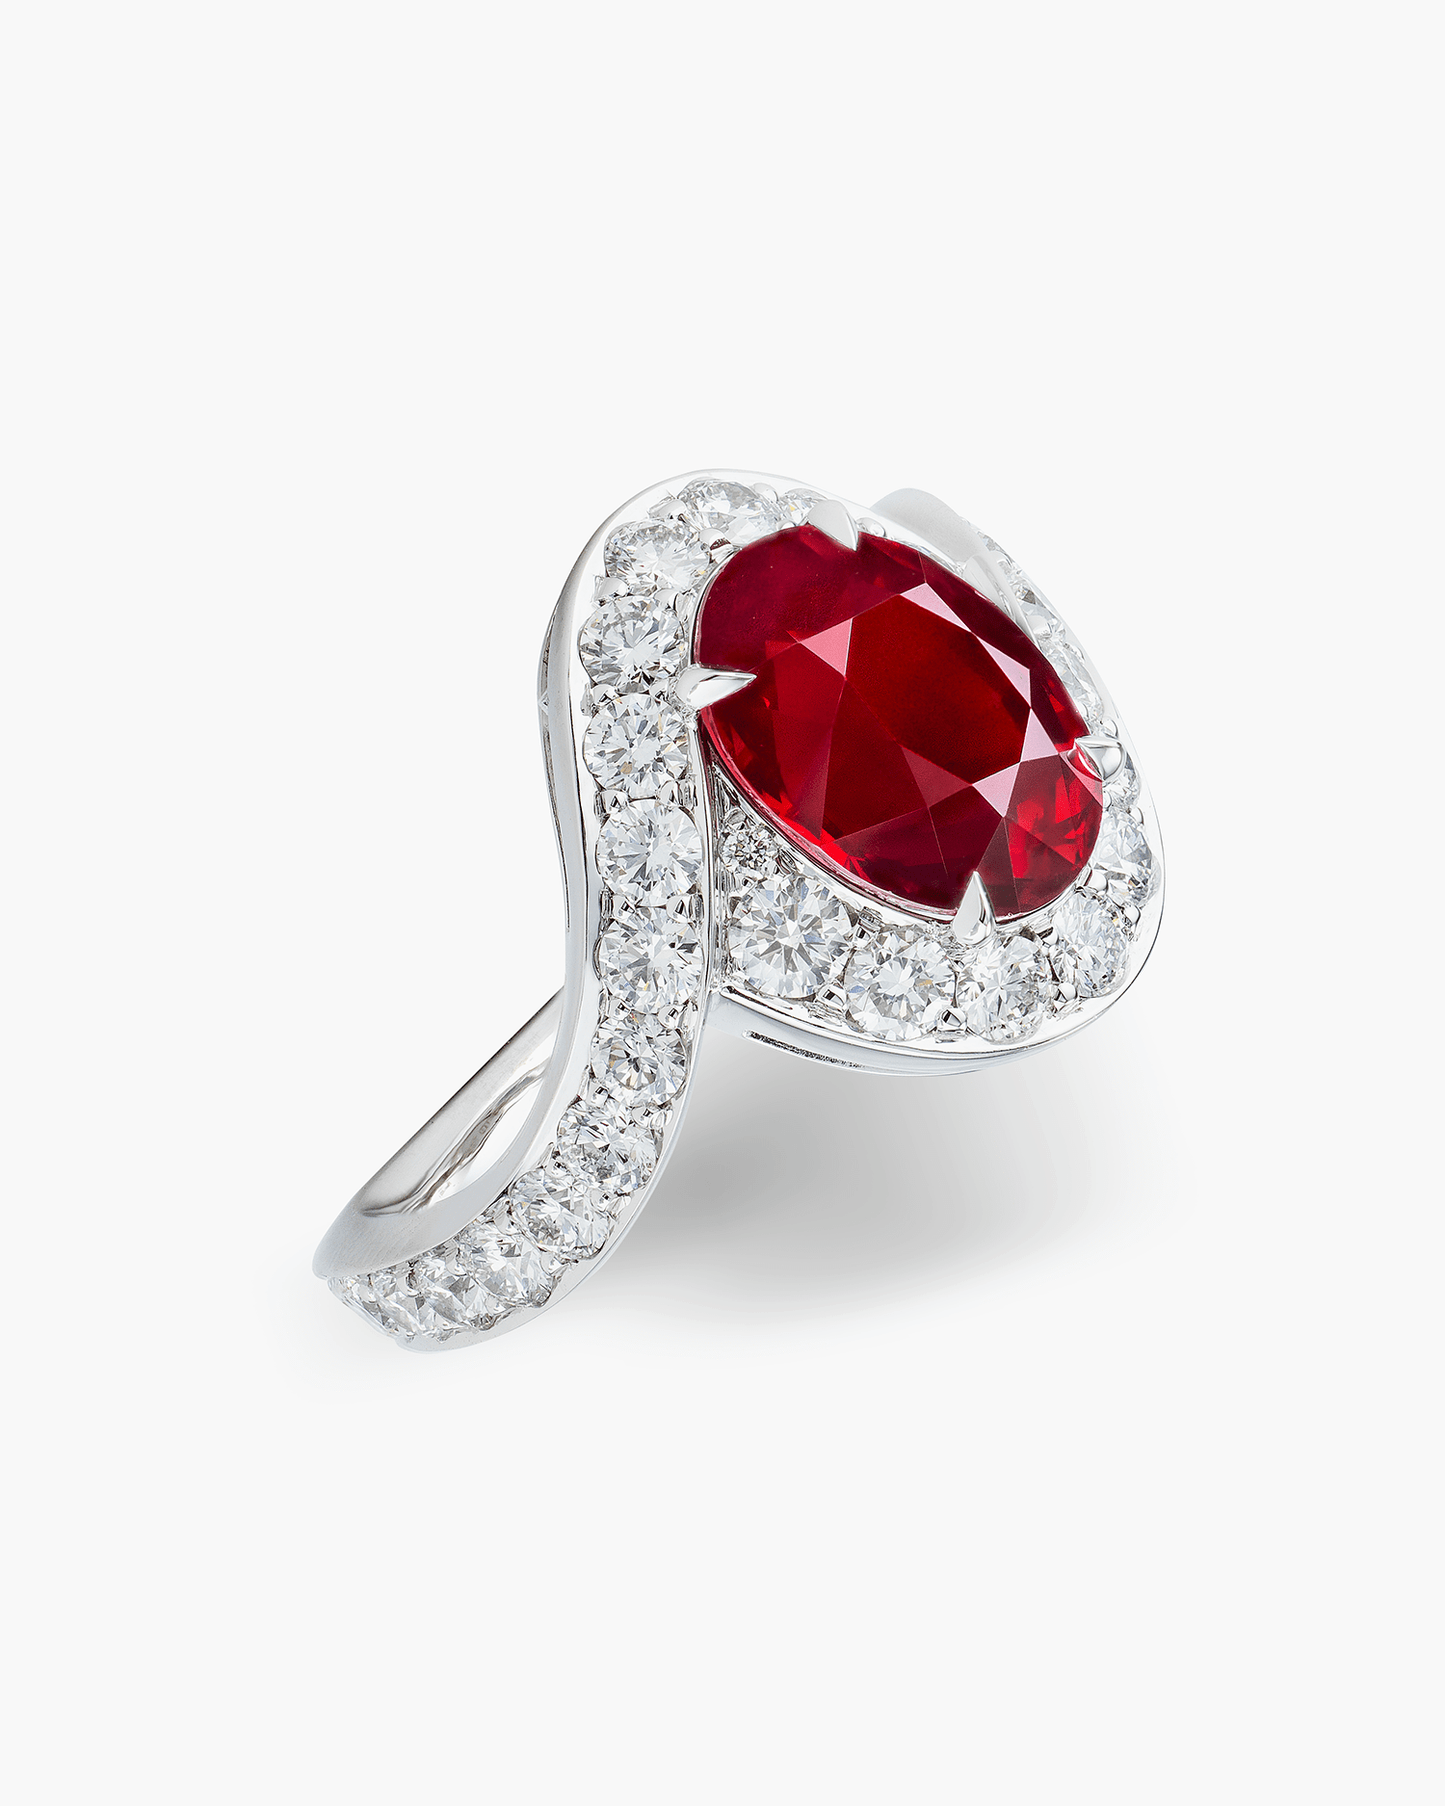 3.37 carat Oval Shape Mozambique Ruby and Diamond Ring